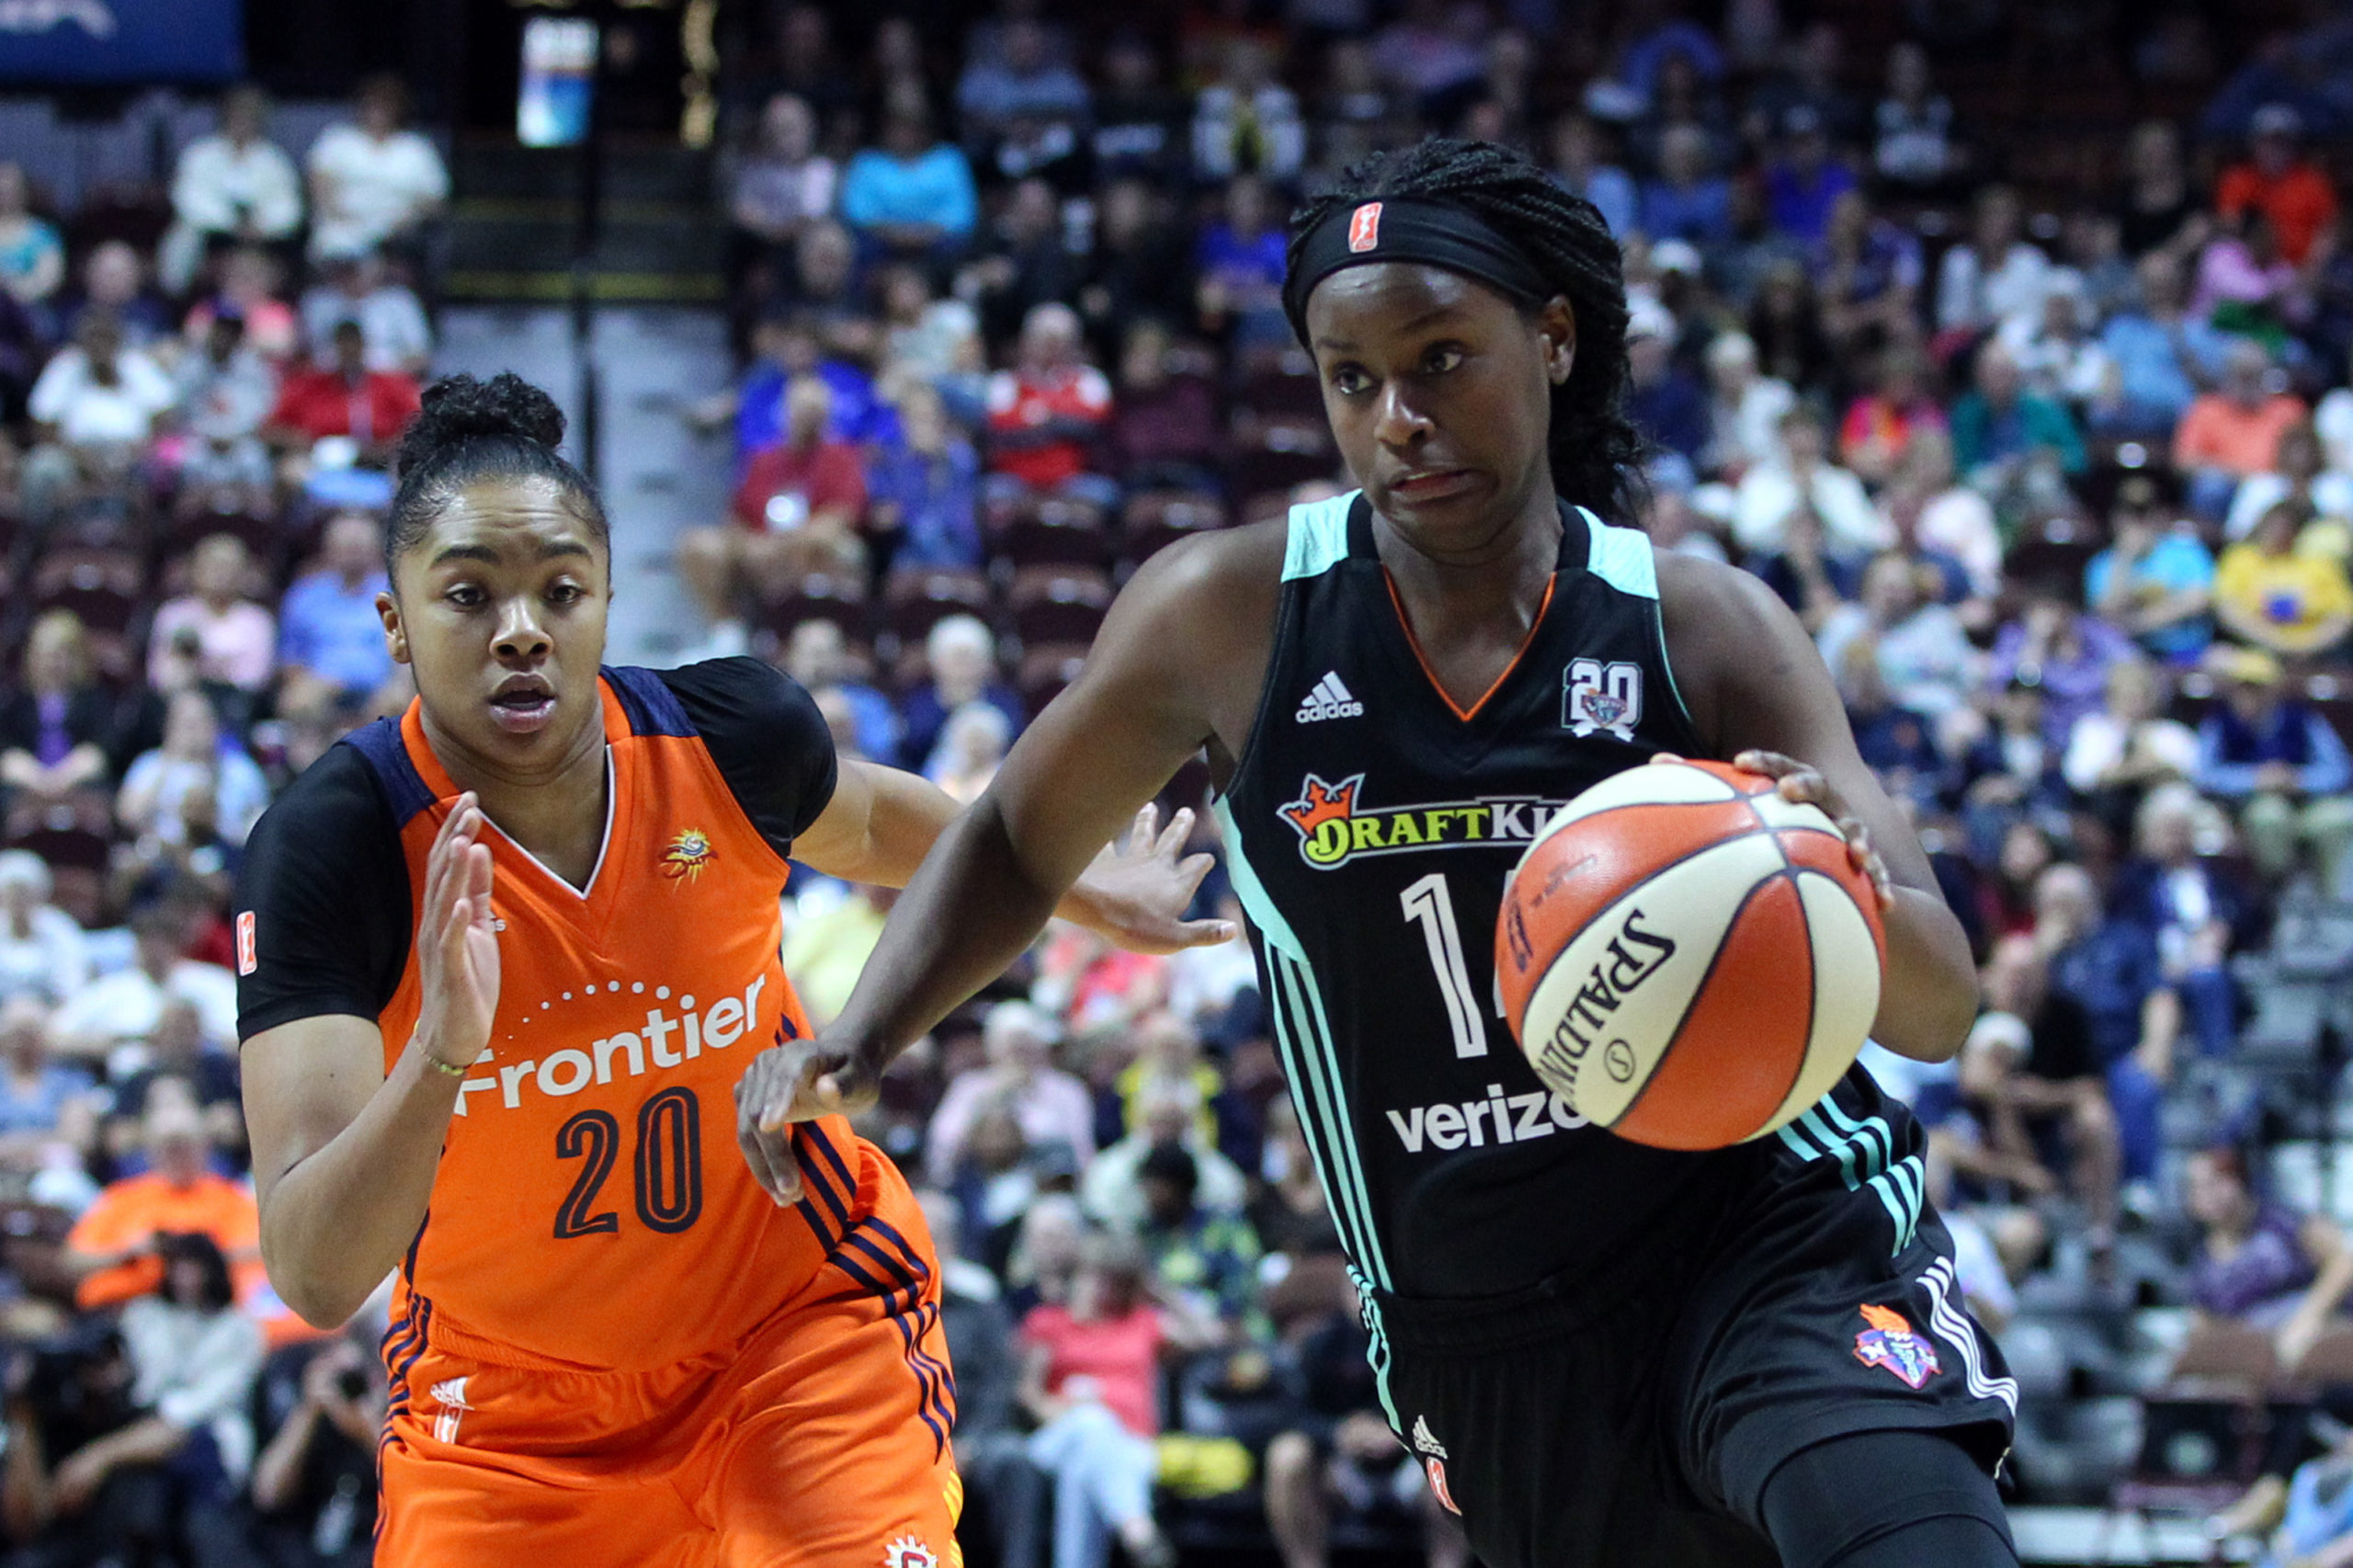 WNBA Makes Improved Proposal for 2020 Season, Players to Receive Full Salar...